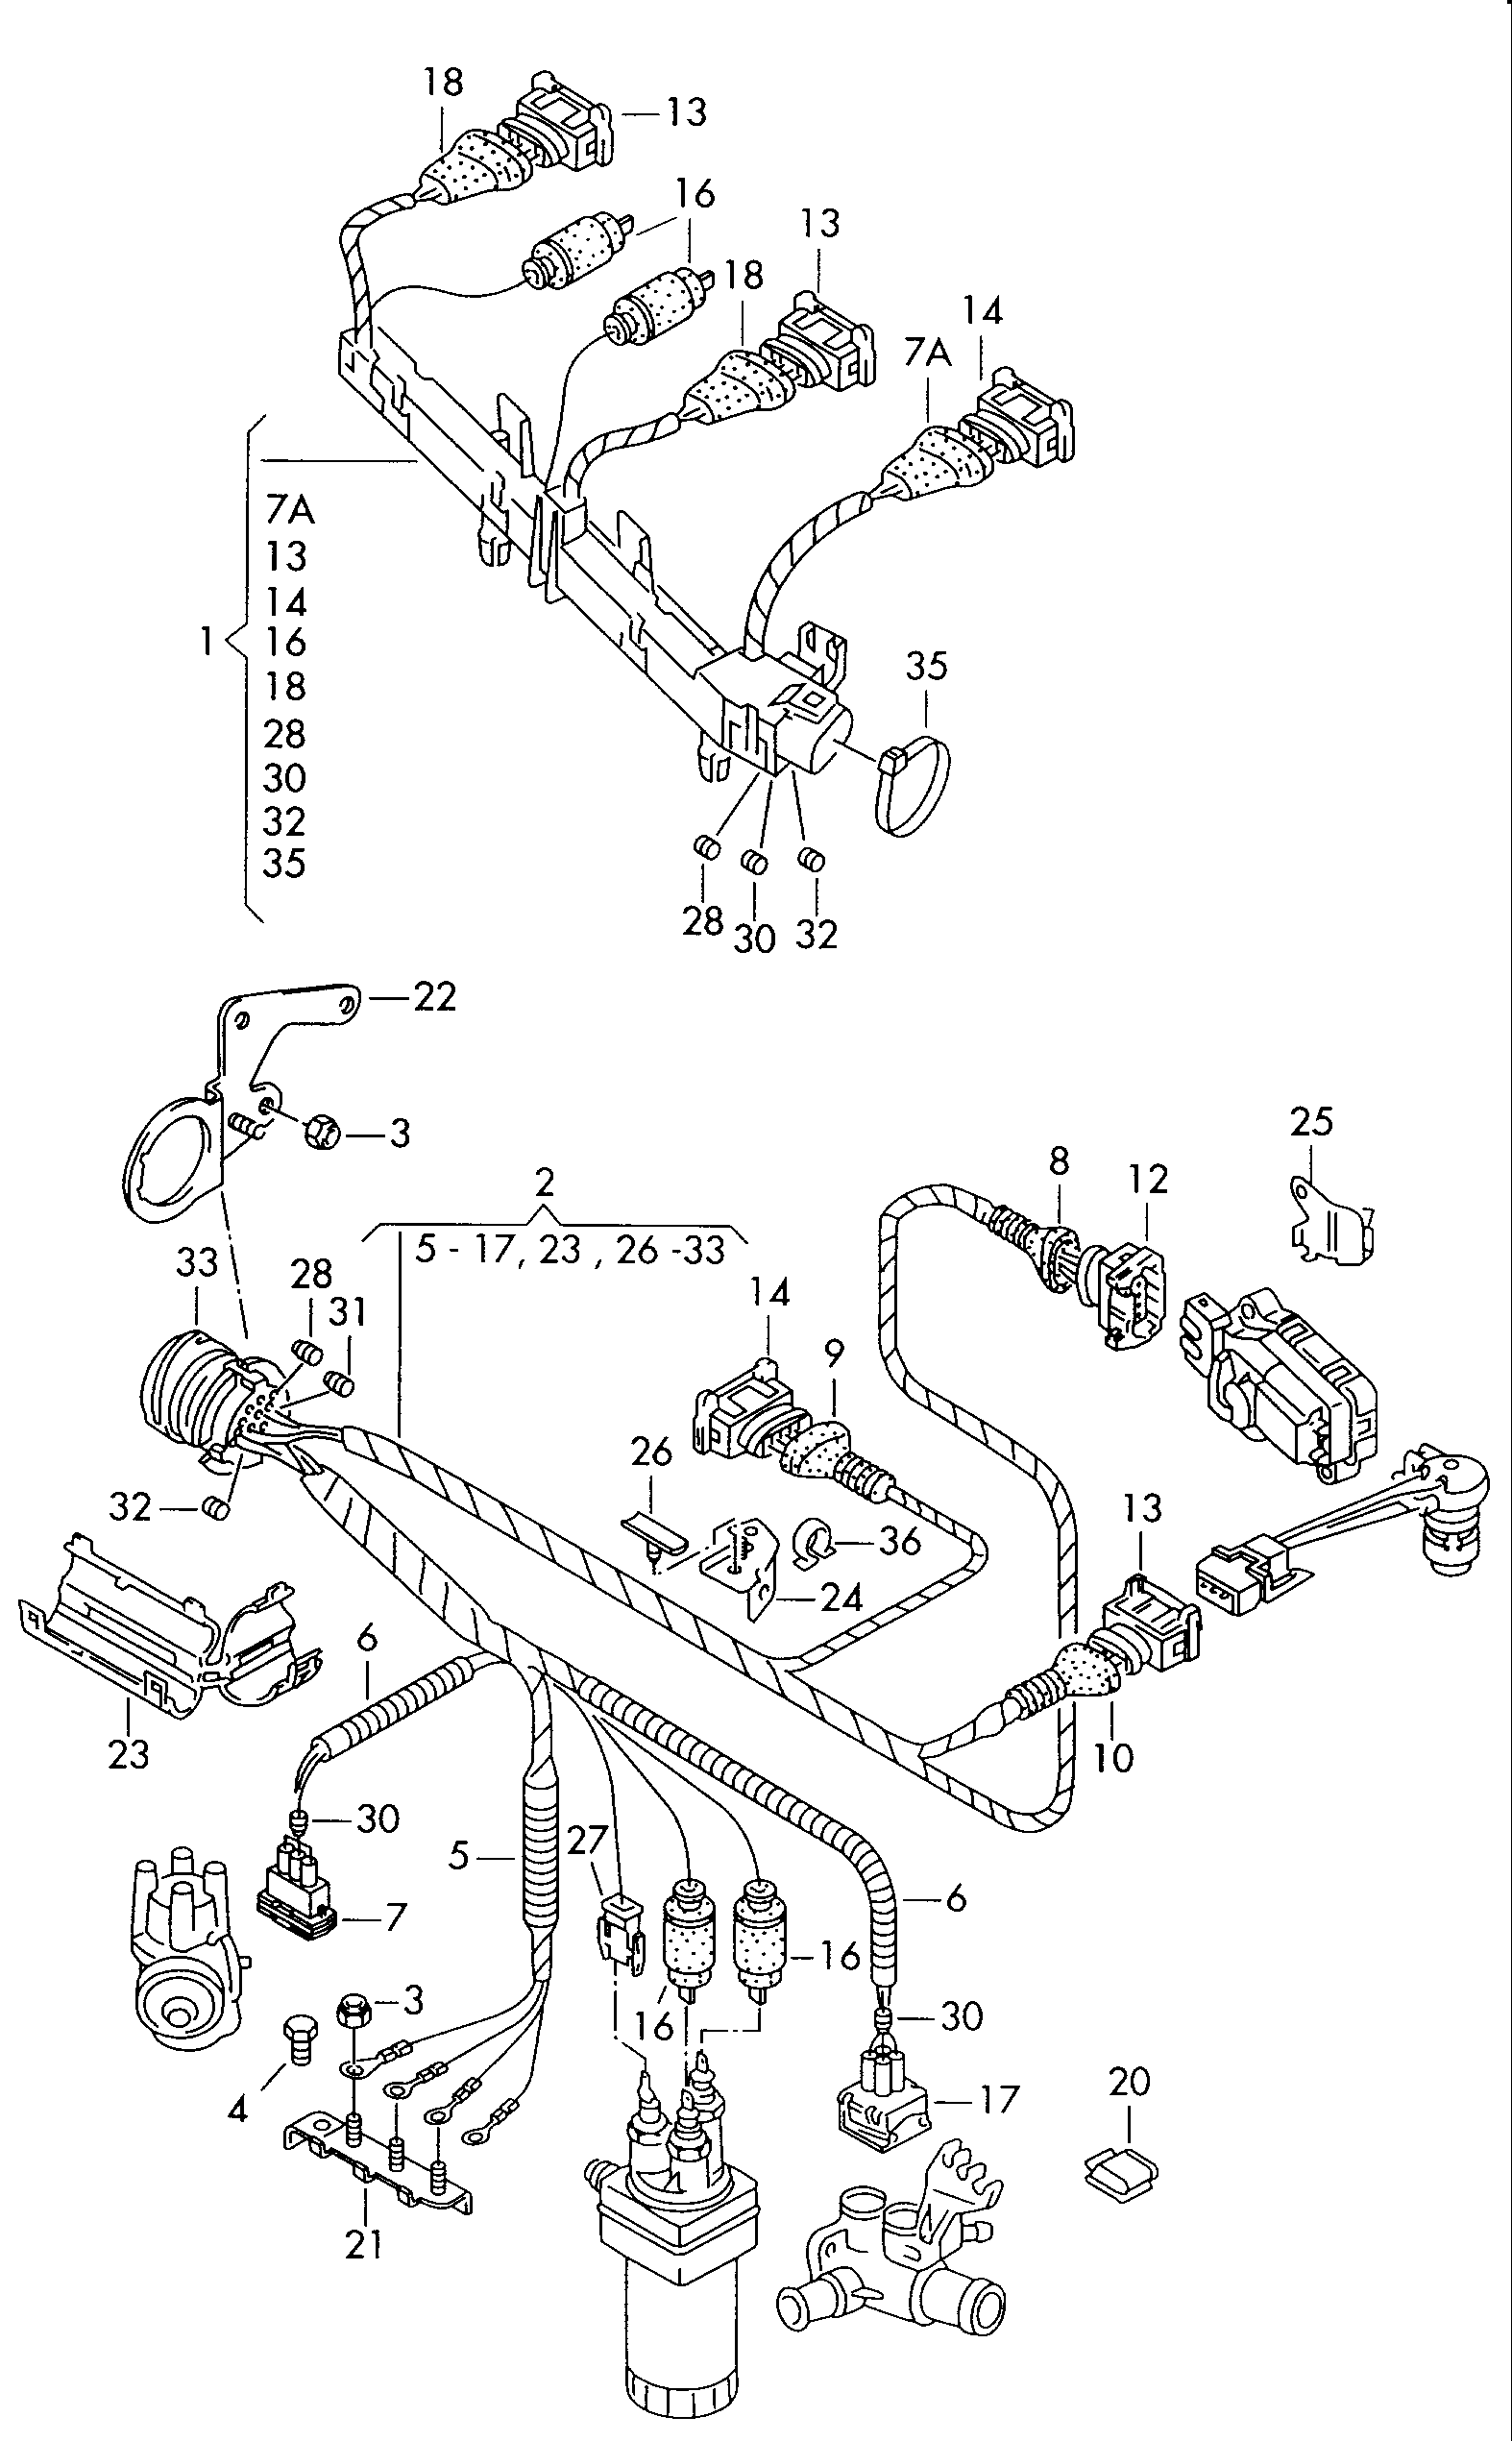 wiring set for engine - Caddy(CA)  